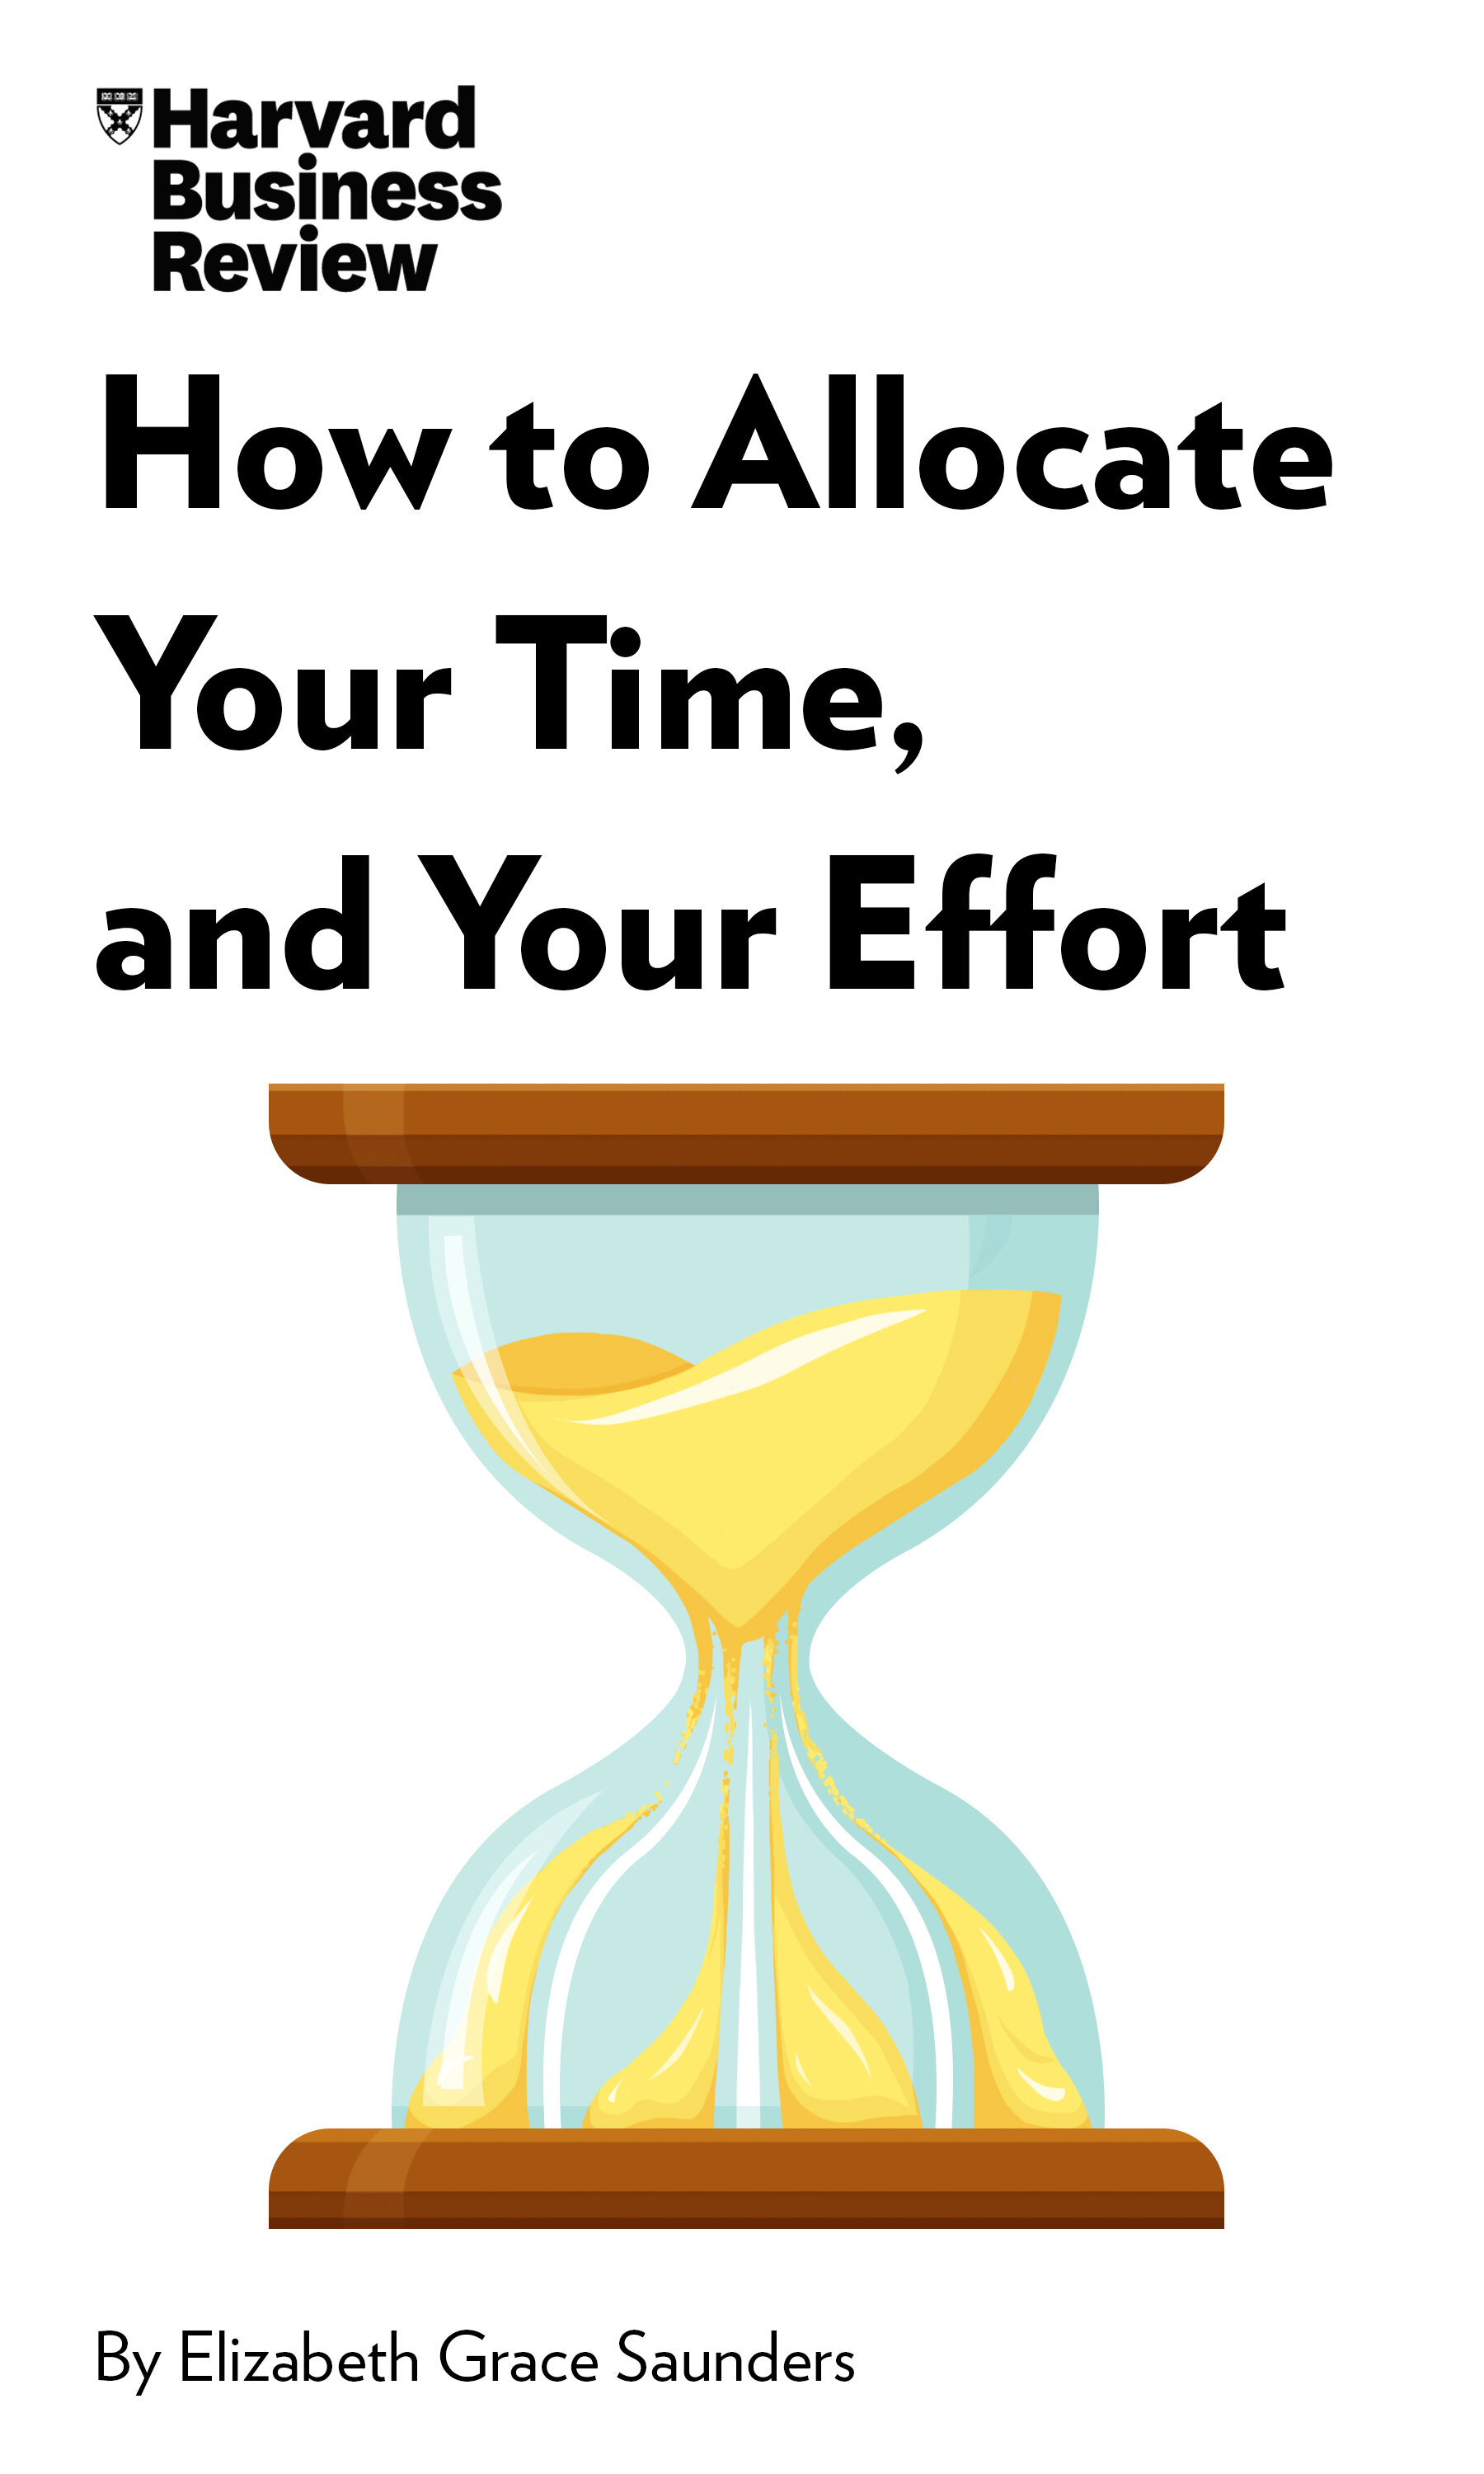 How-to-Allocate-Your-Time-and-Your-Effort-eBook.jpg